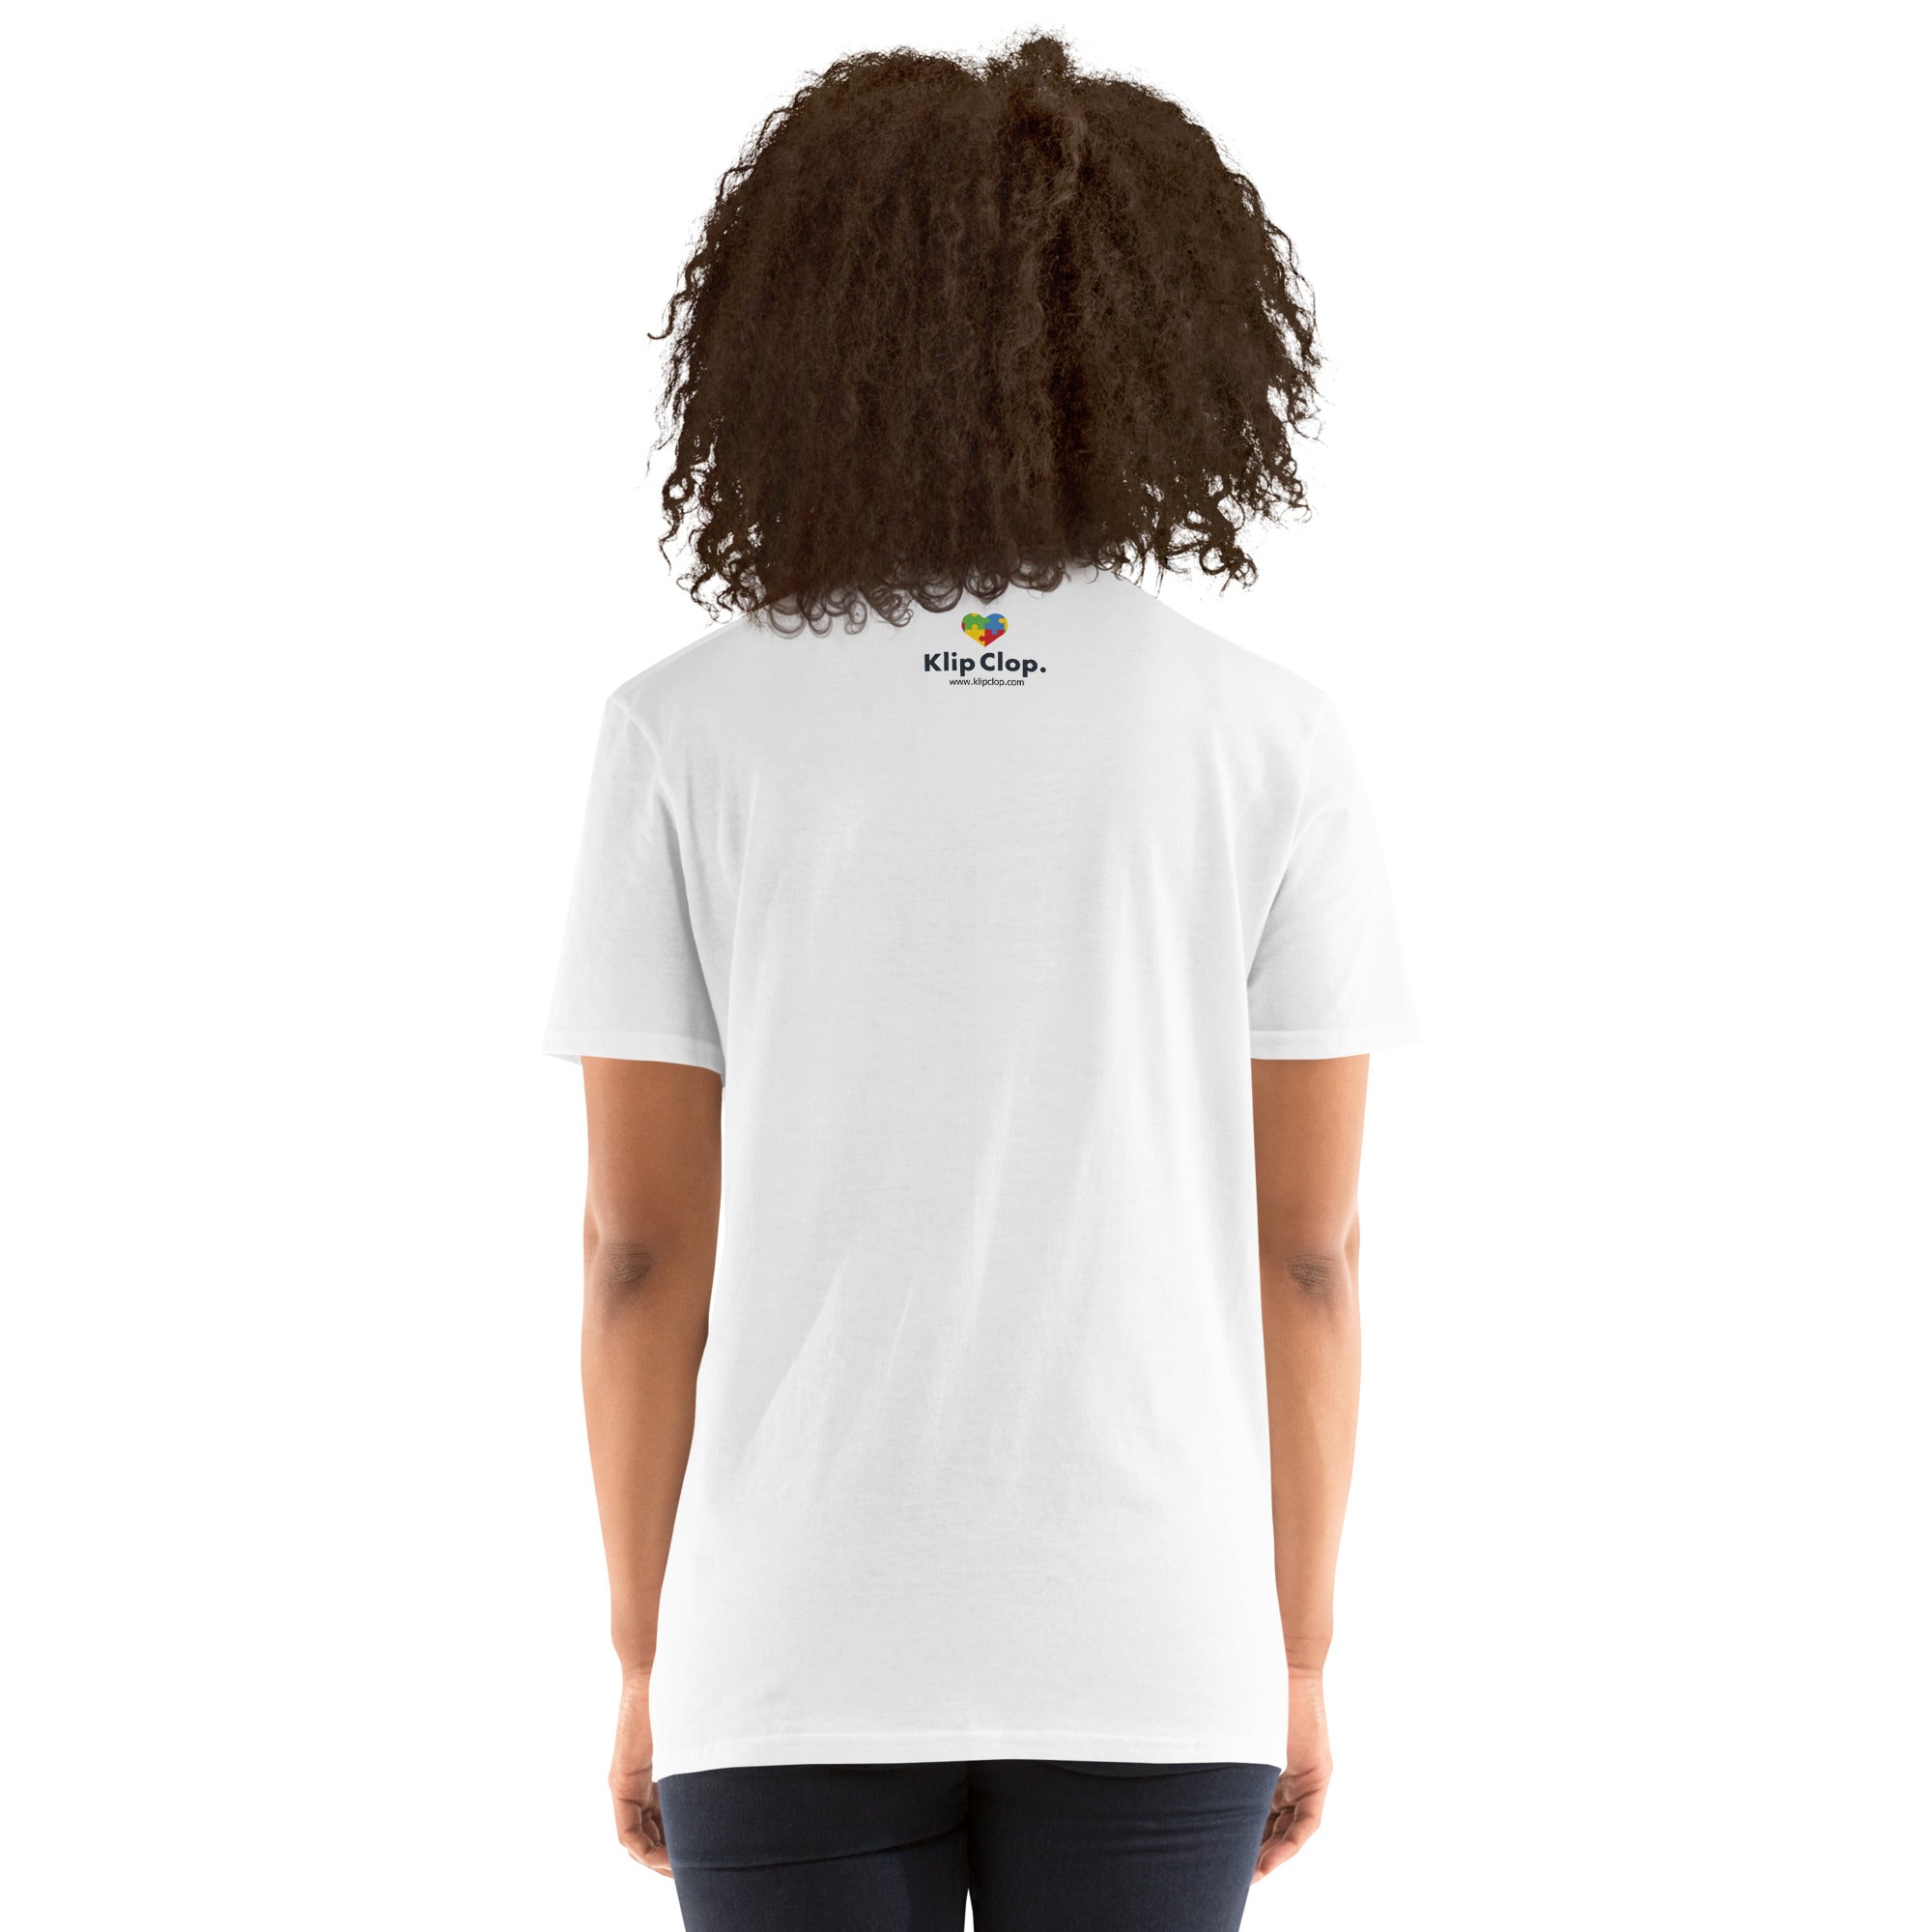 Short-Sleeve Unisex T-Shirt- What makes you different is What Makes you Beautiful